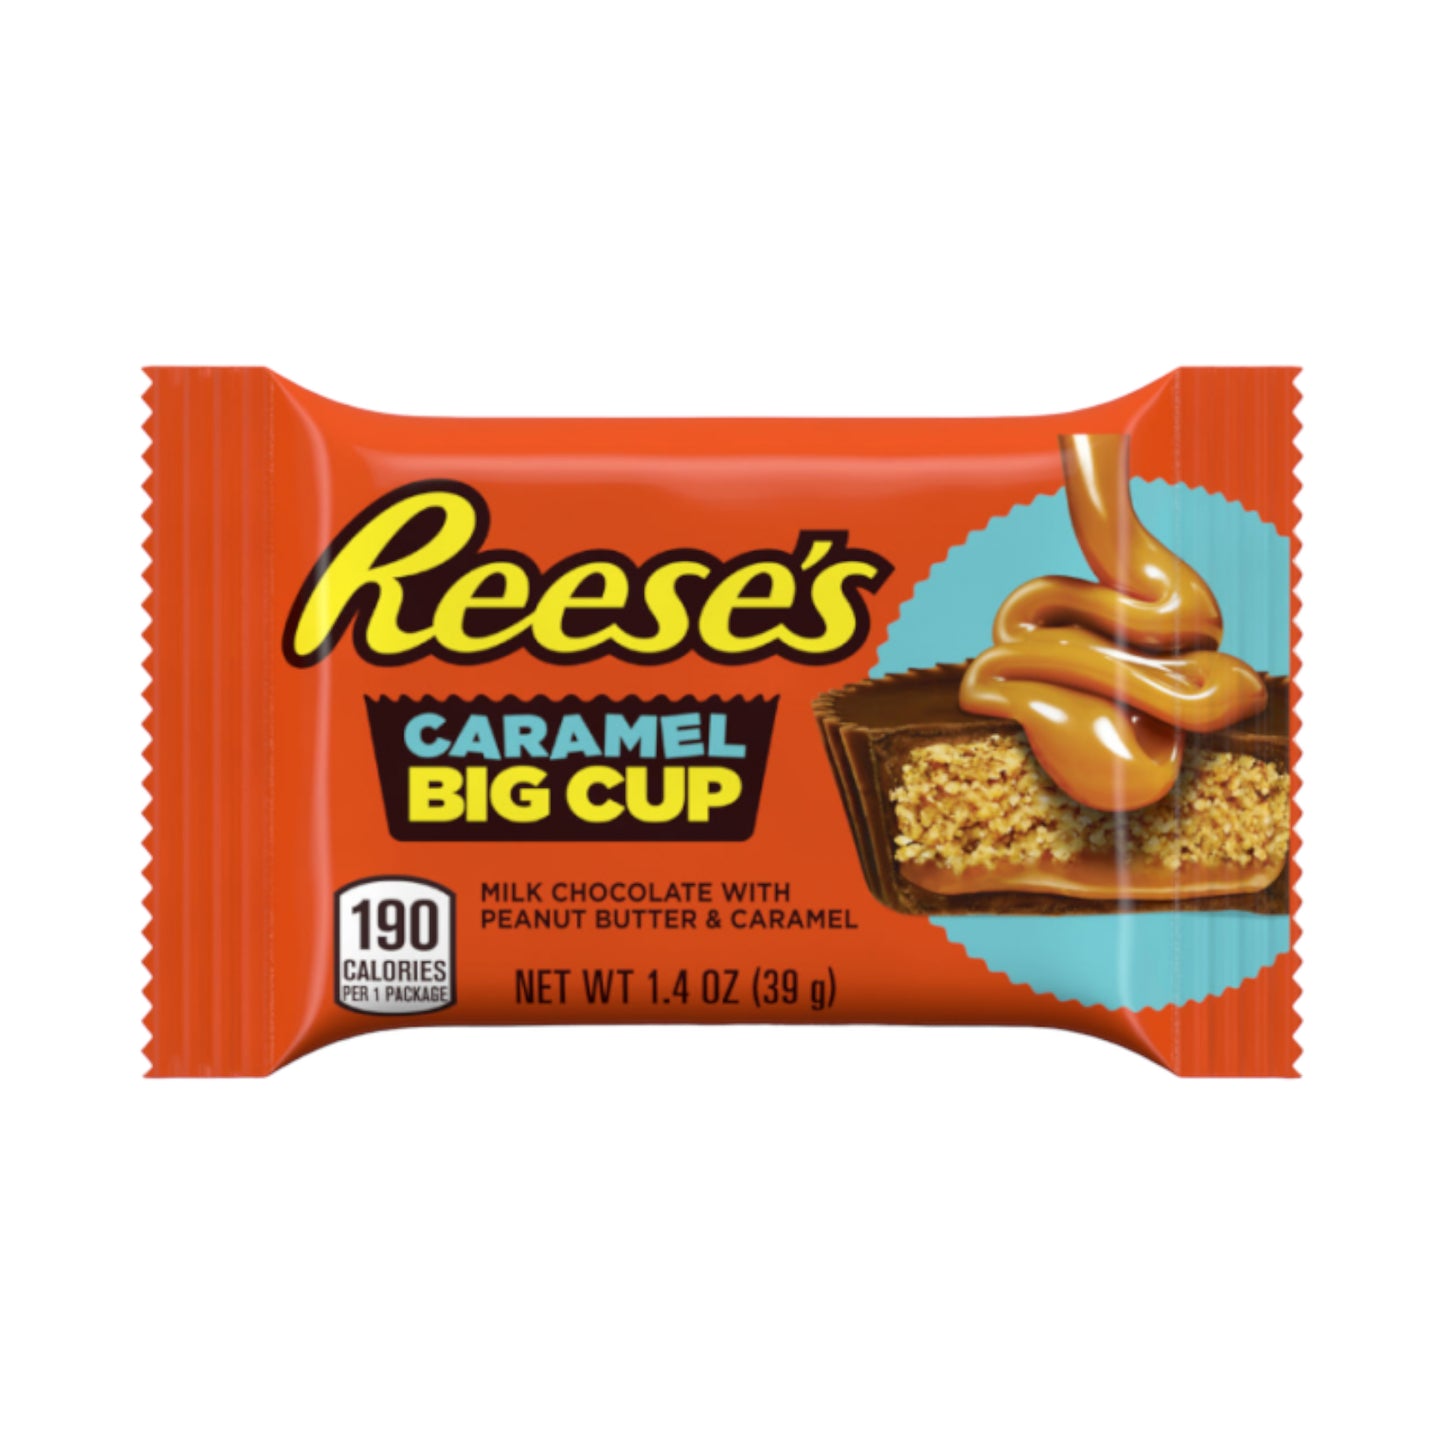 Reese's Peanut Butter Big Cup with Caramel - 1.4oz (39g)